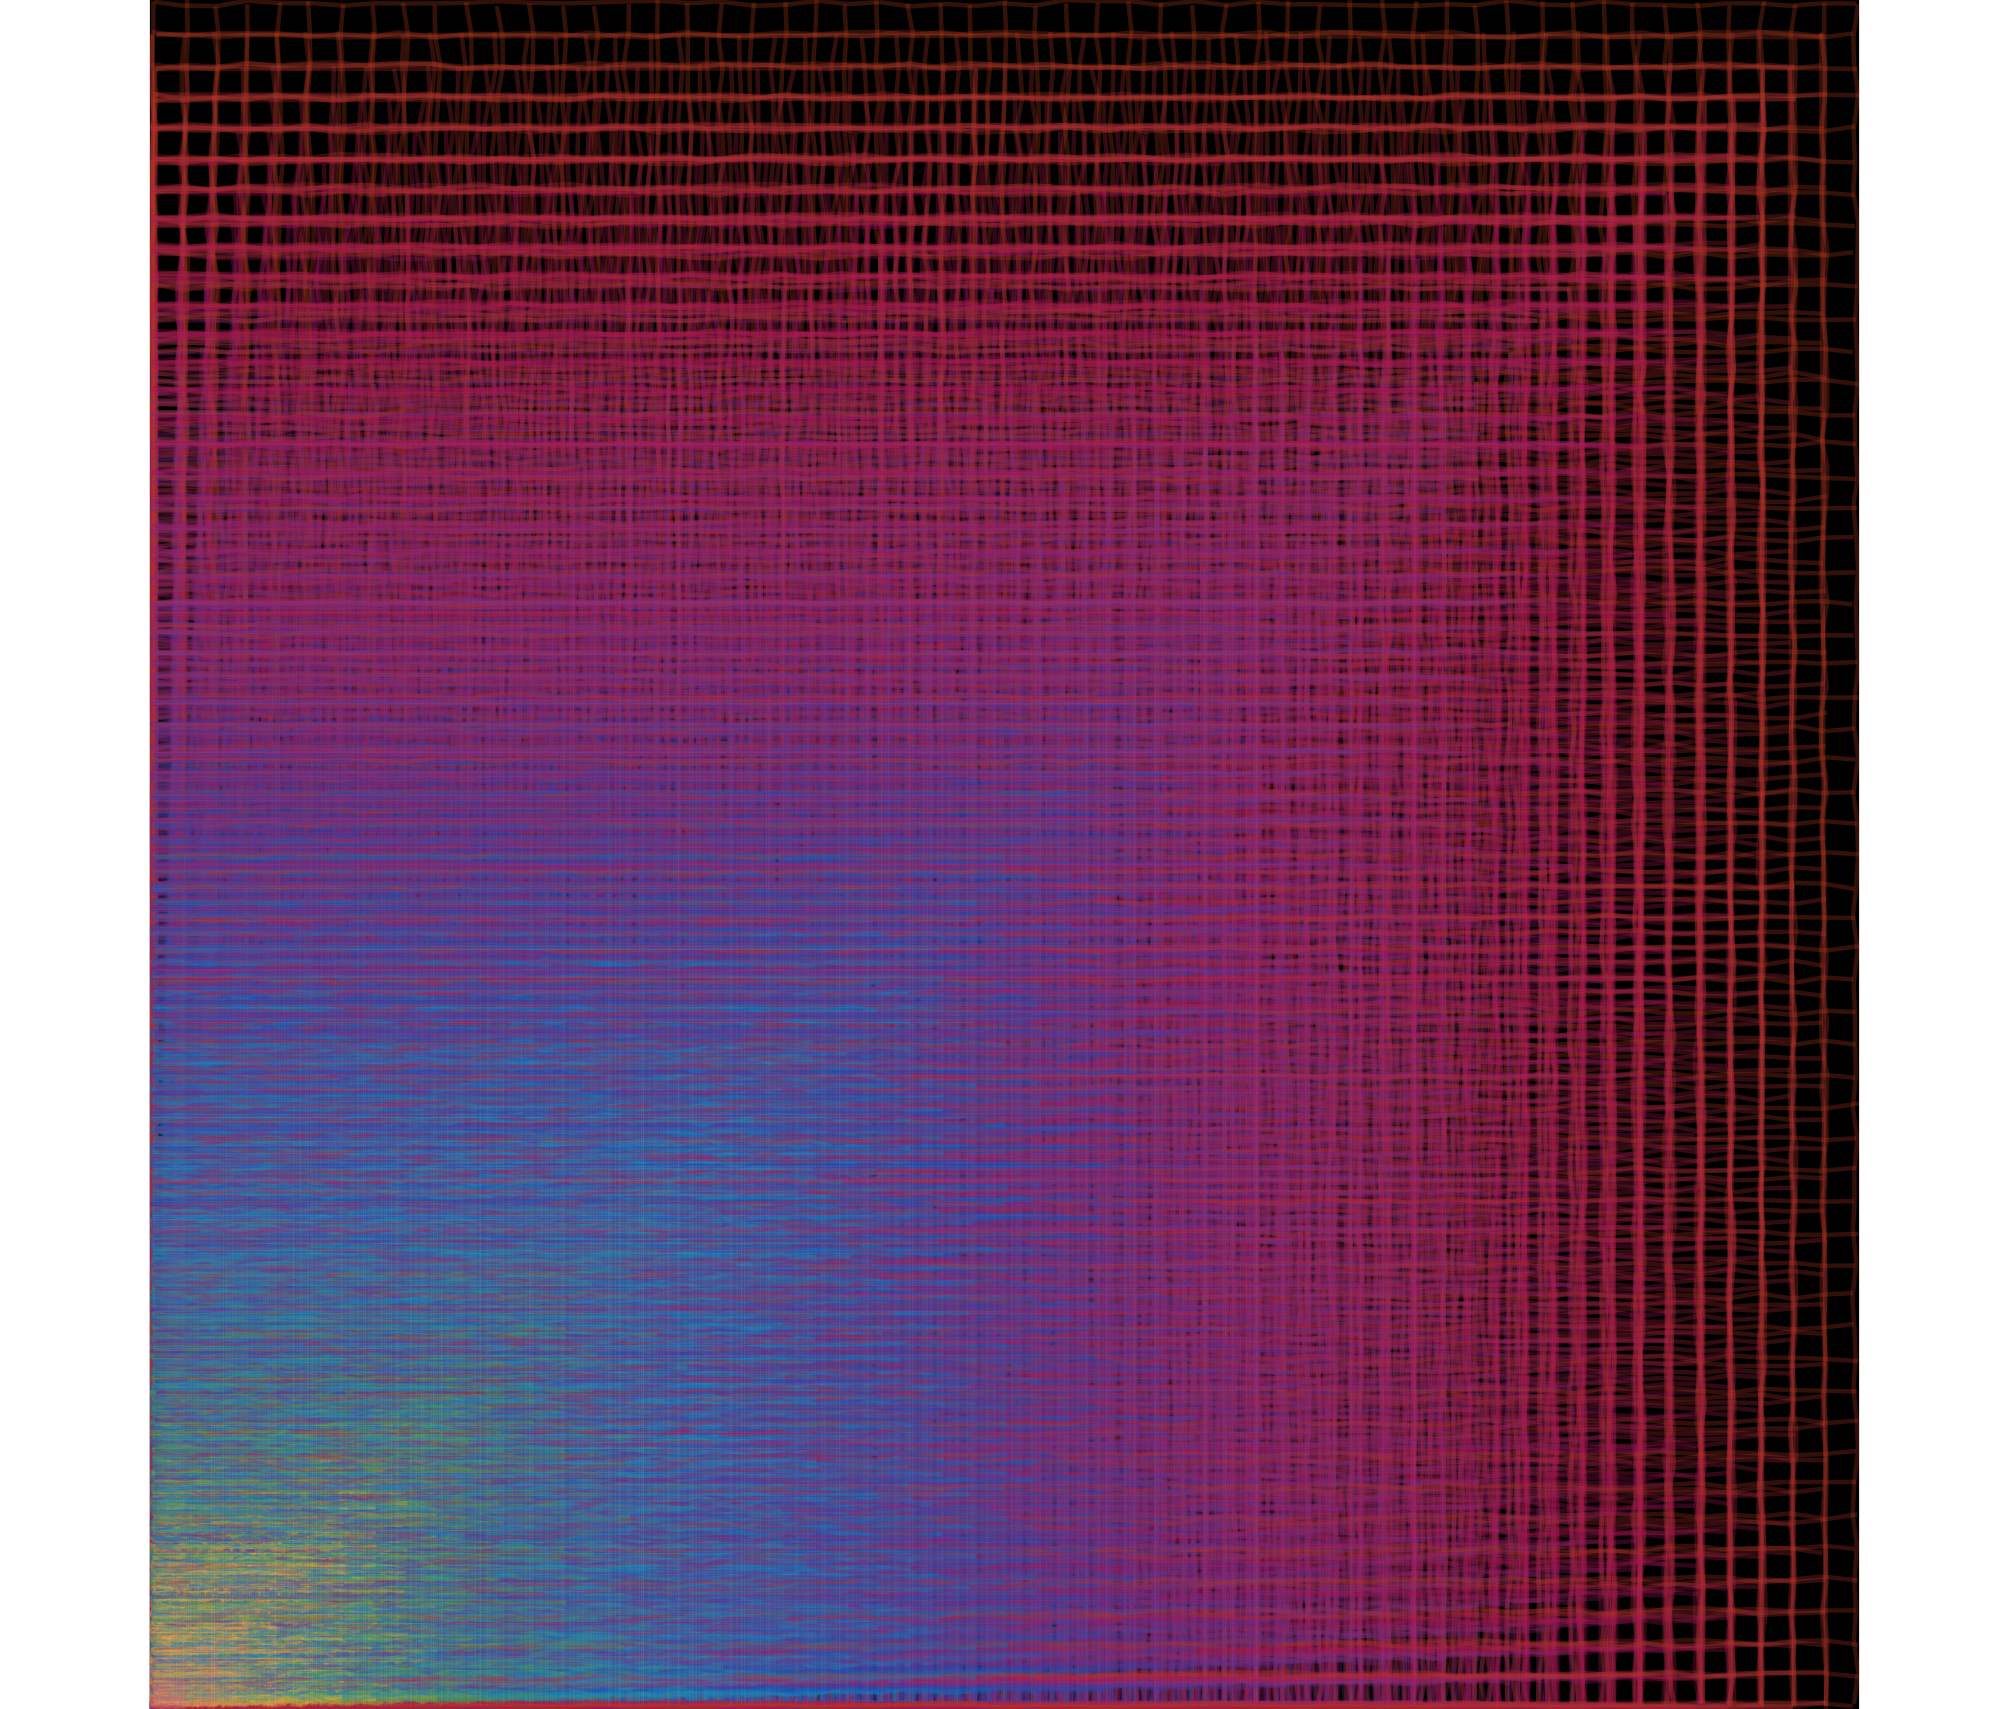 A generative art piece of a small square grid of rainbow colored lines that has been blown up and layered over each other multiple times on a black background. The lines appear to be a bit distorted.